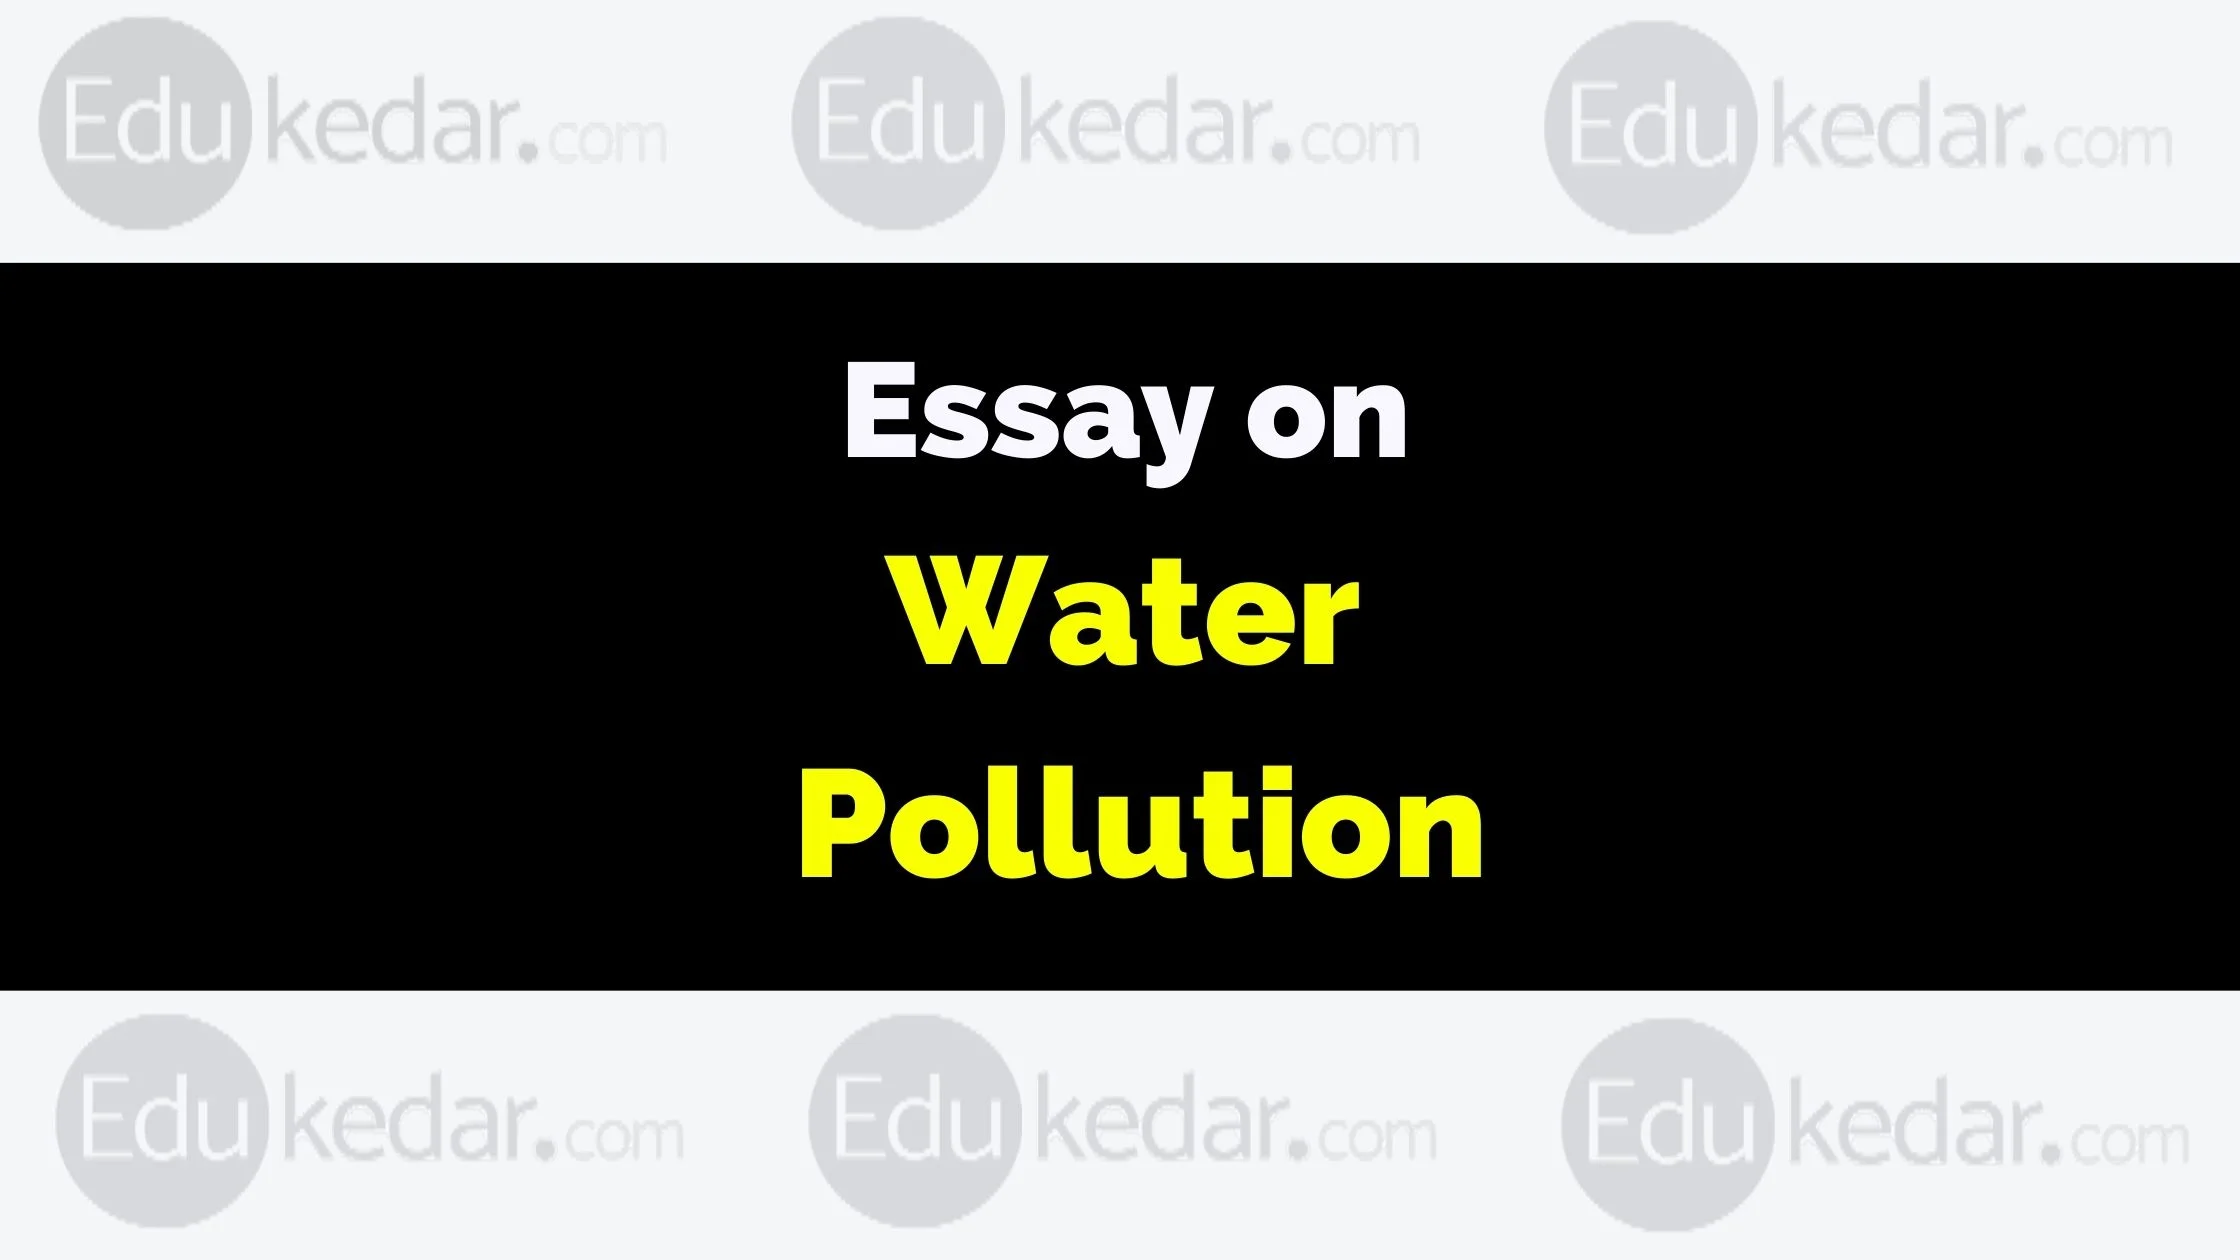 essay on water pollution in 250 words